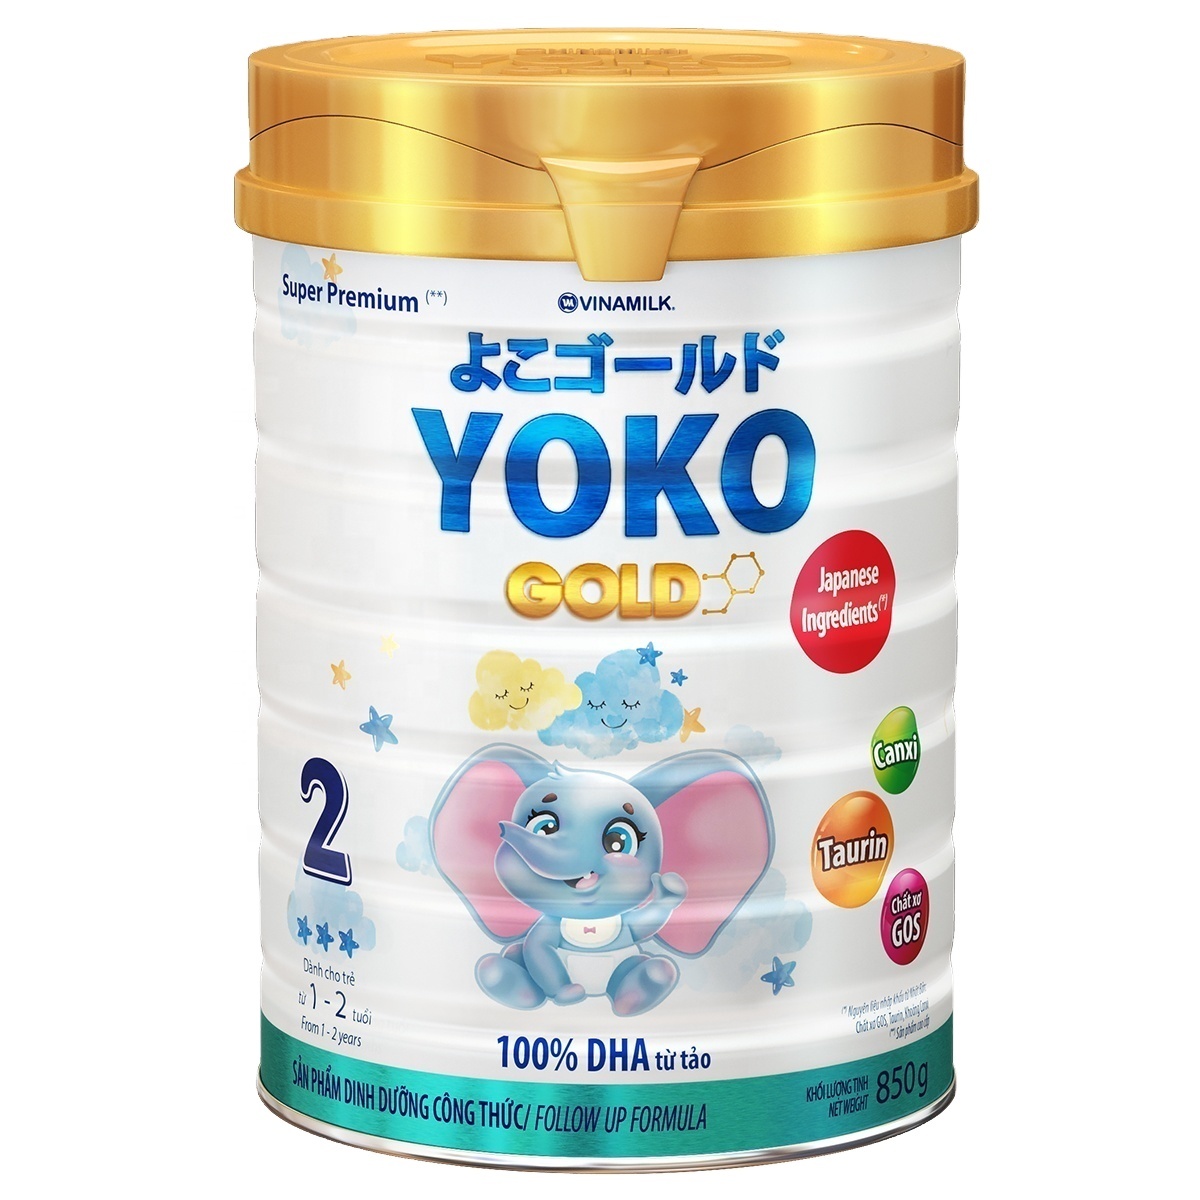 Factory price Baby Powdered Milk Vinamilk Yoko Good Nutrition from Japan Step 2 For Children 1-2 years old 850g x 12 tins GMP